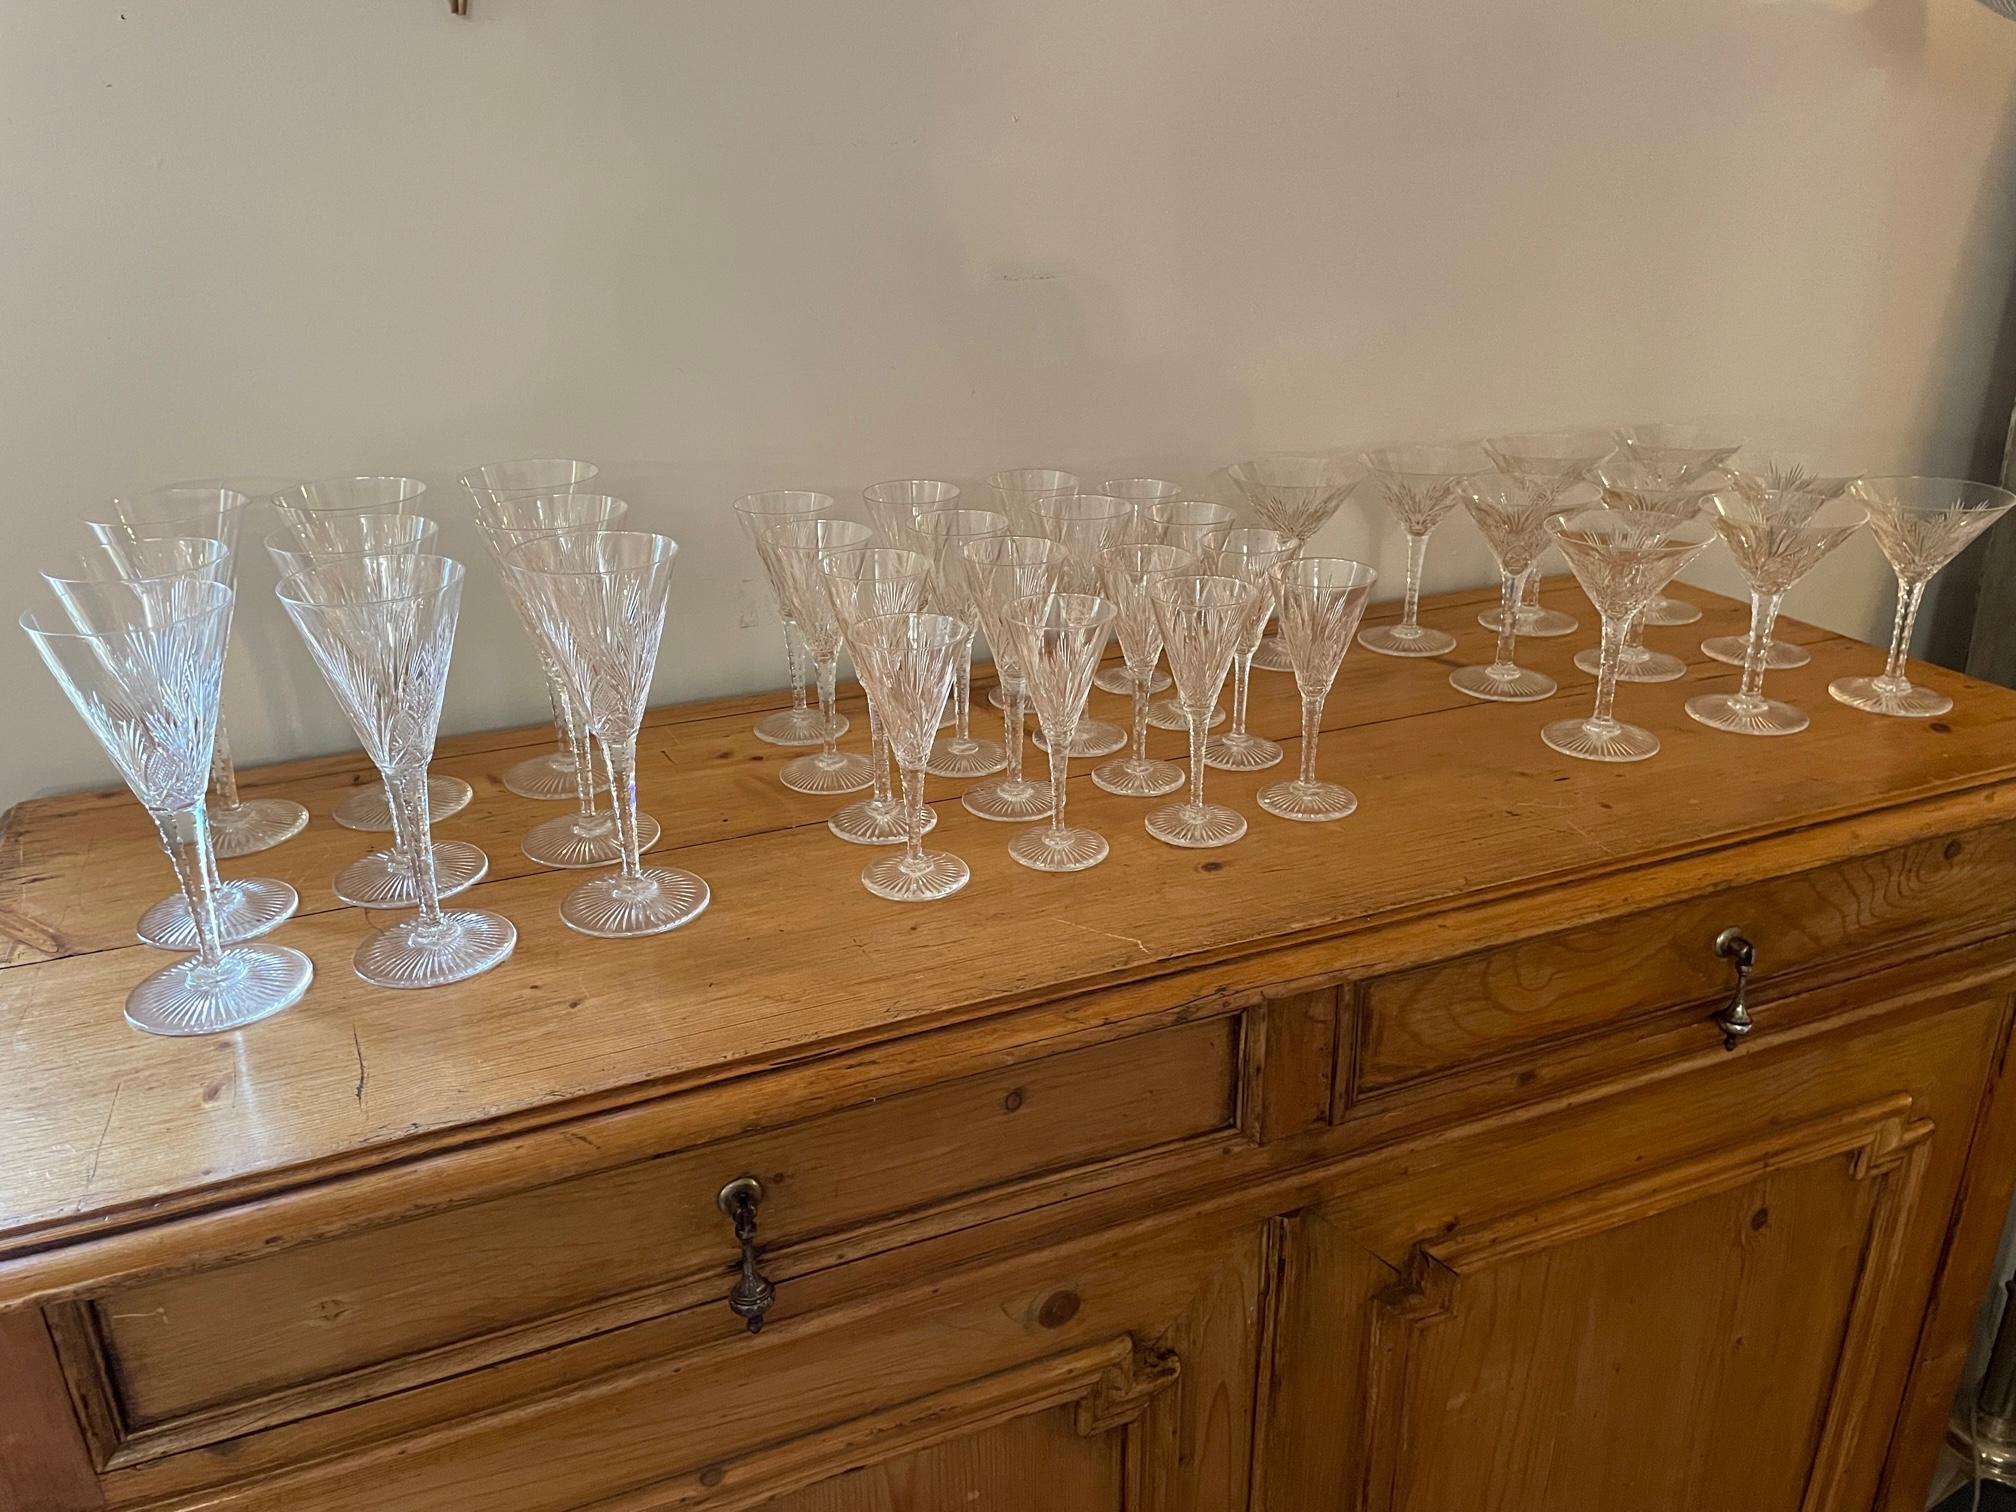 Exceptional 20th century French Art Deco set of Saint Louis Cristallerie glasses. 
- 9 red wine glasses 19X8 
- 10 champagne glasses 14X10
- 8 white wine glasses 15X6
- 8 liquor glasses 14X0
Very beautiful model of conical shape decorated with